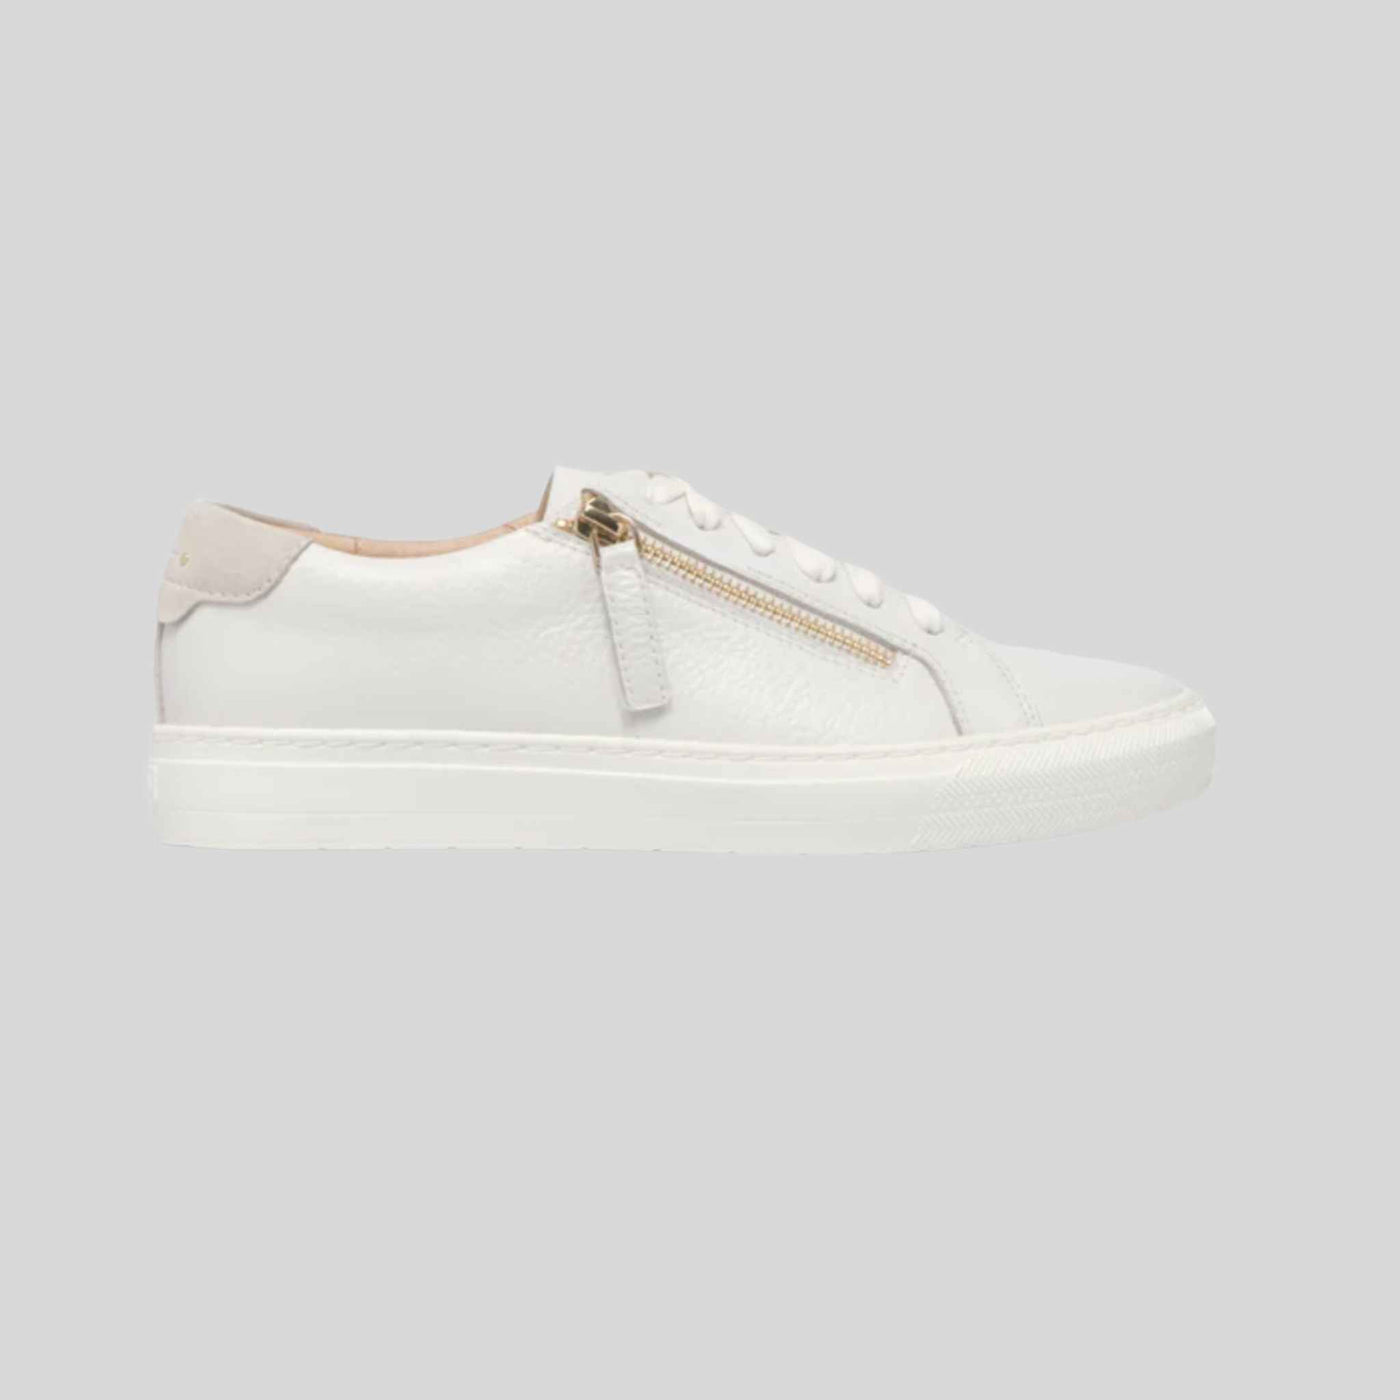 billle white frankie4 sneakers with side zip 